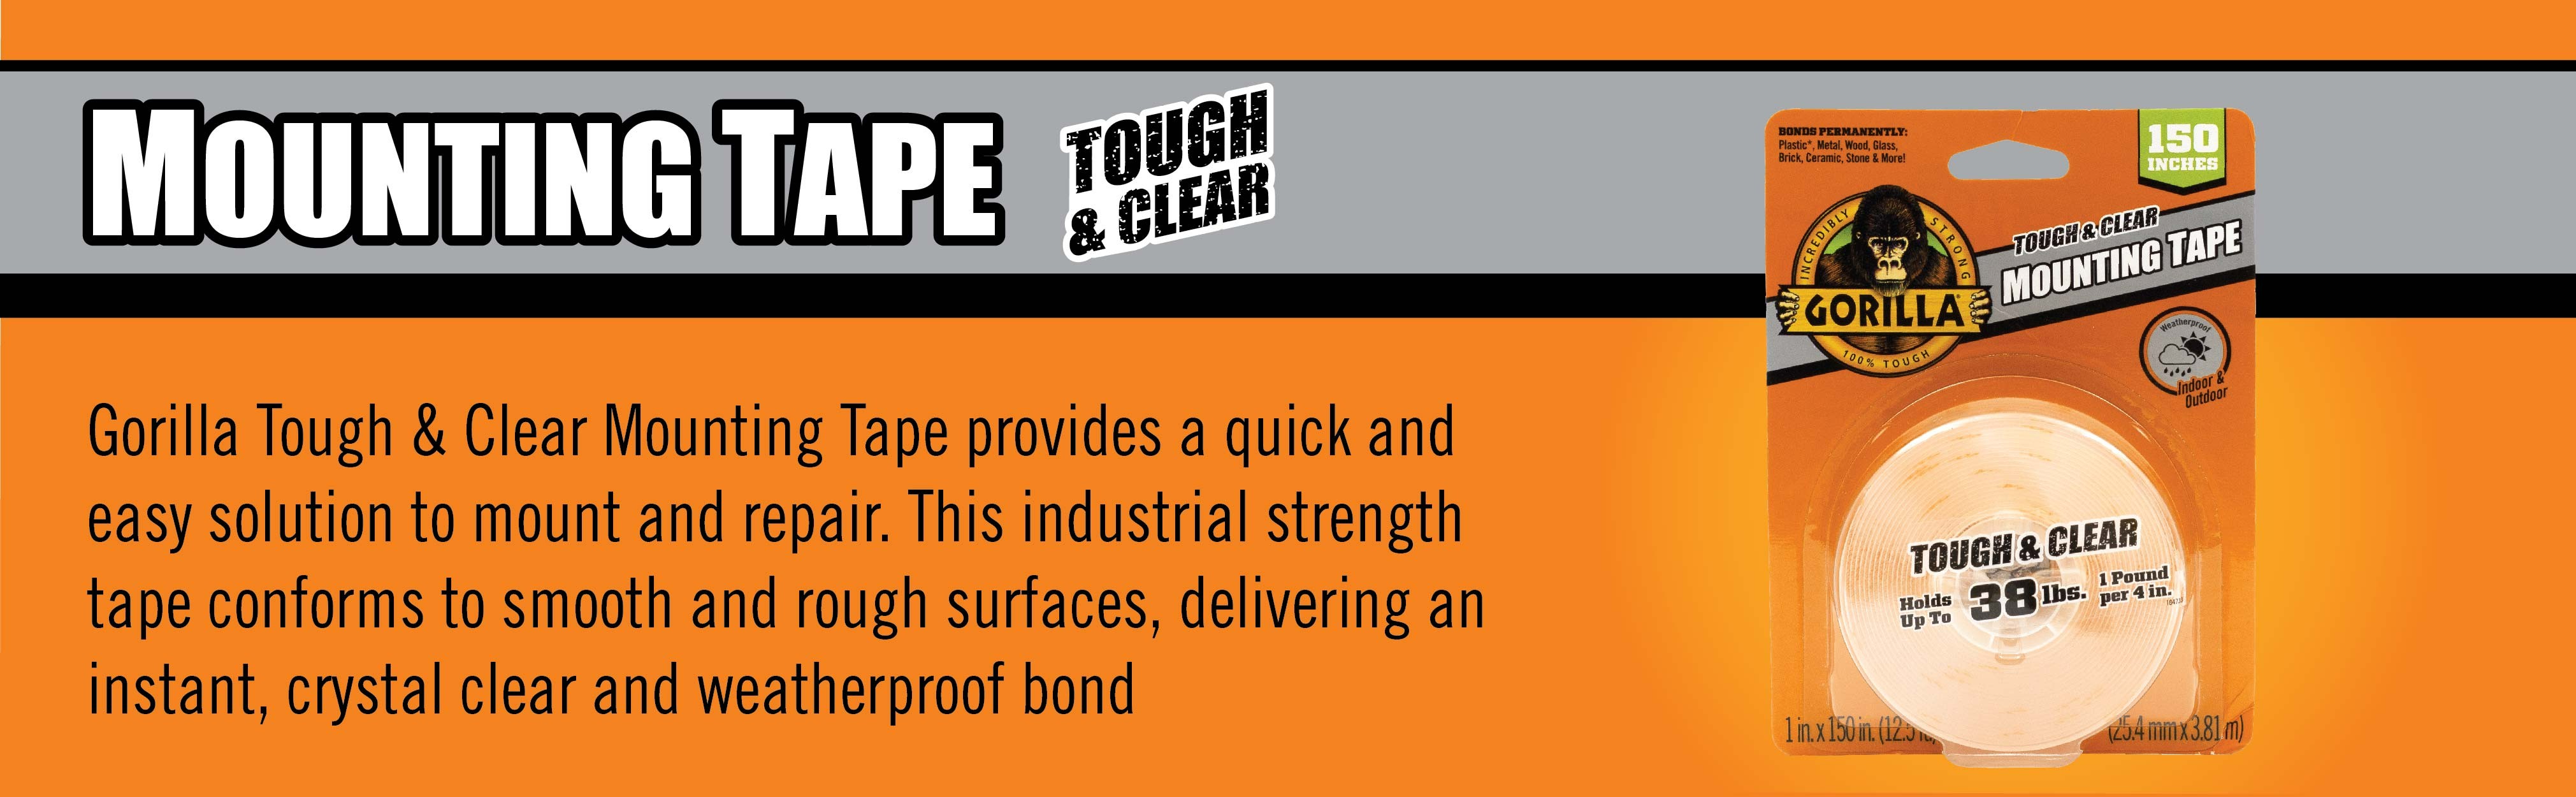 Gorilla Tough and Clear Mounting Tape Squares 1 in